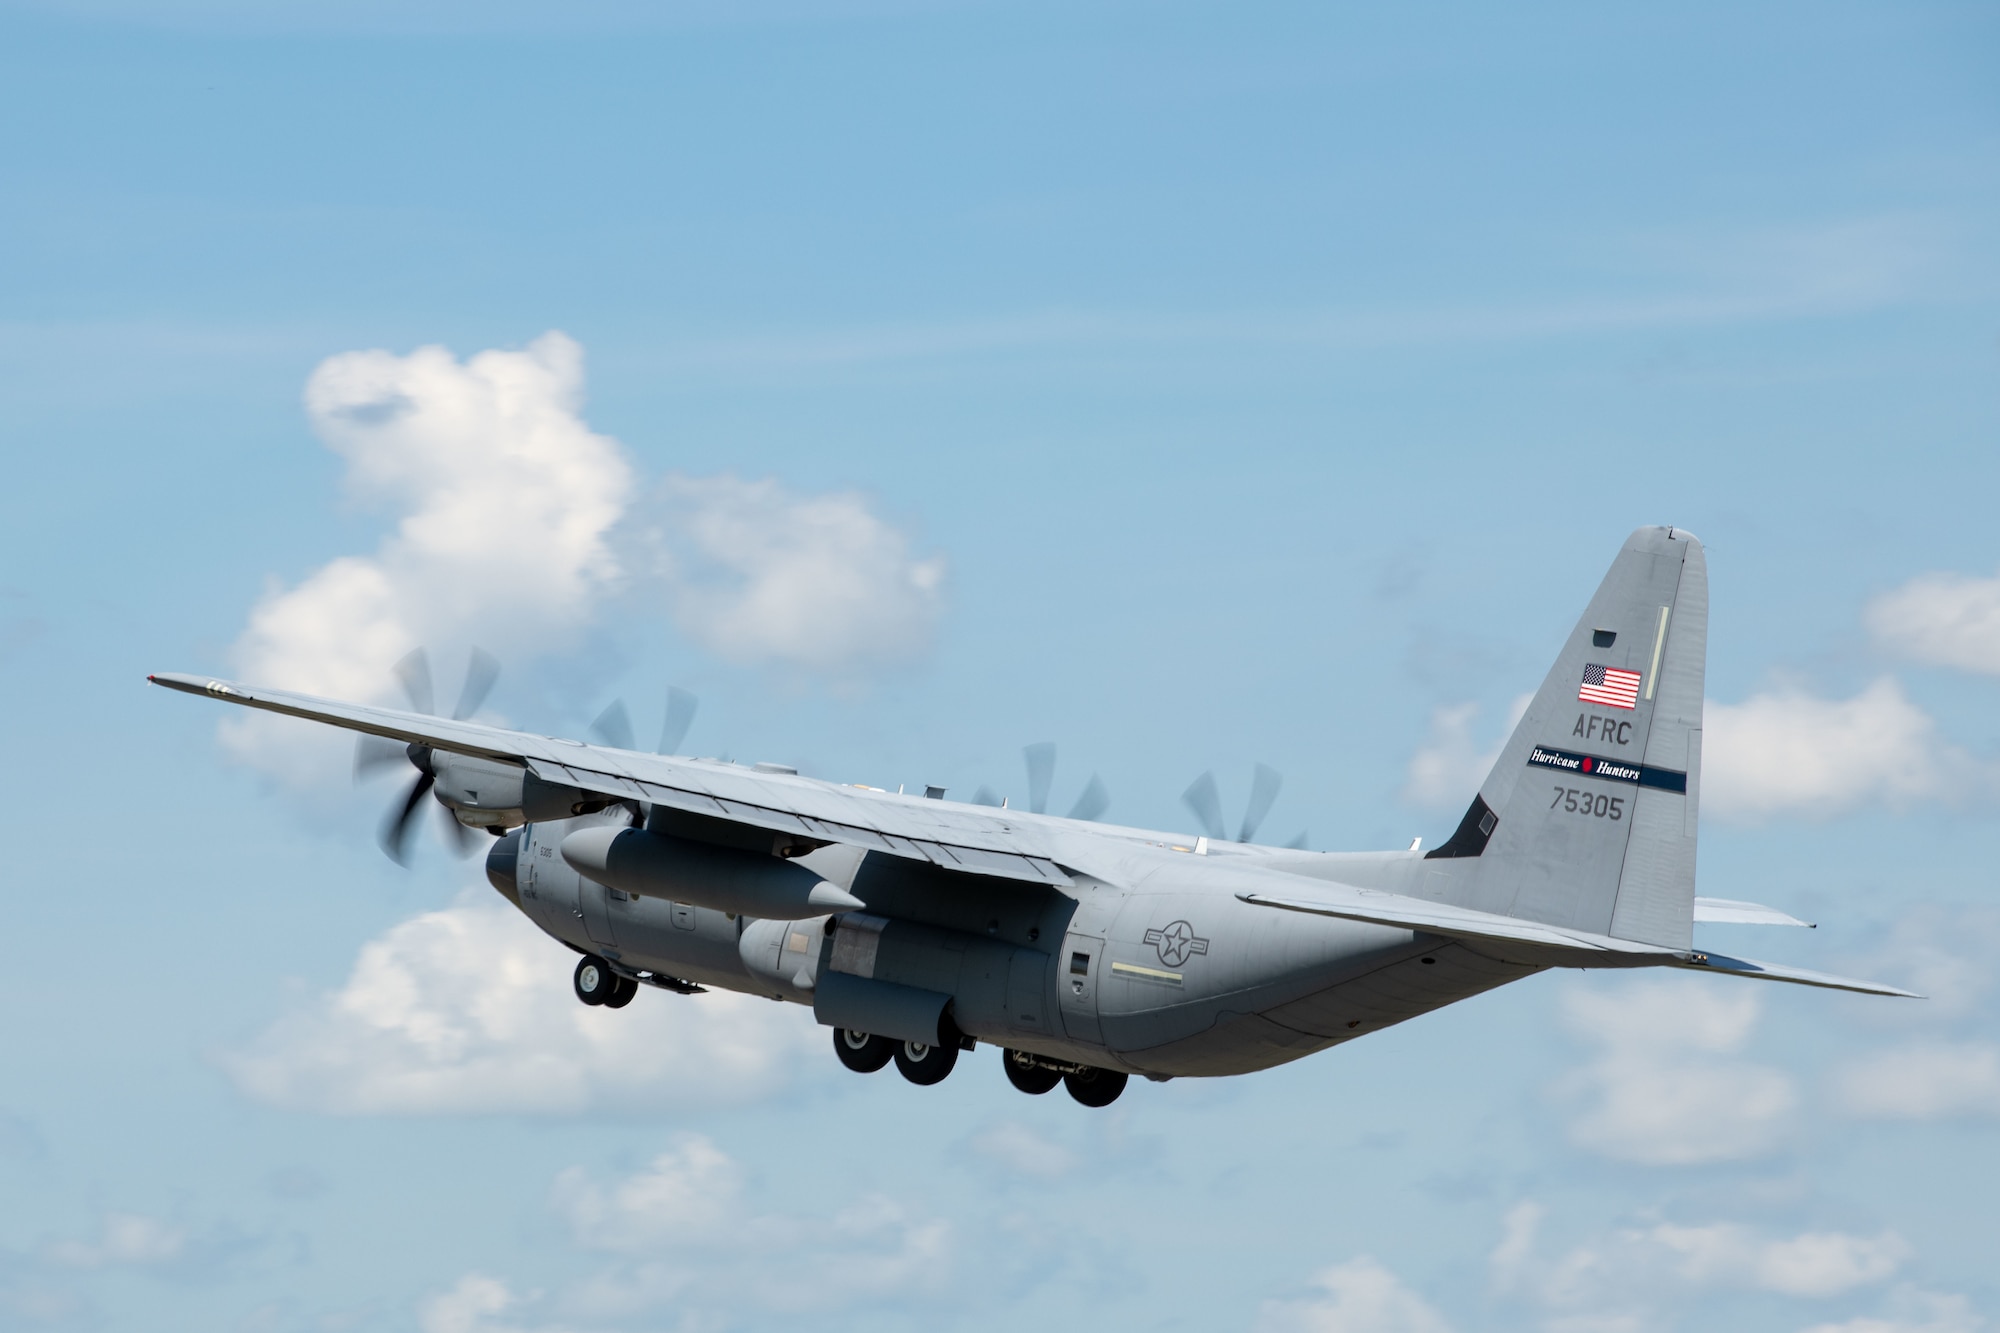 A WC-130J  ascends after take off